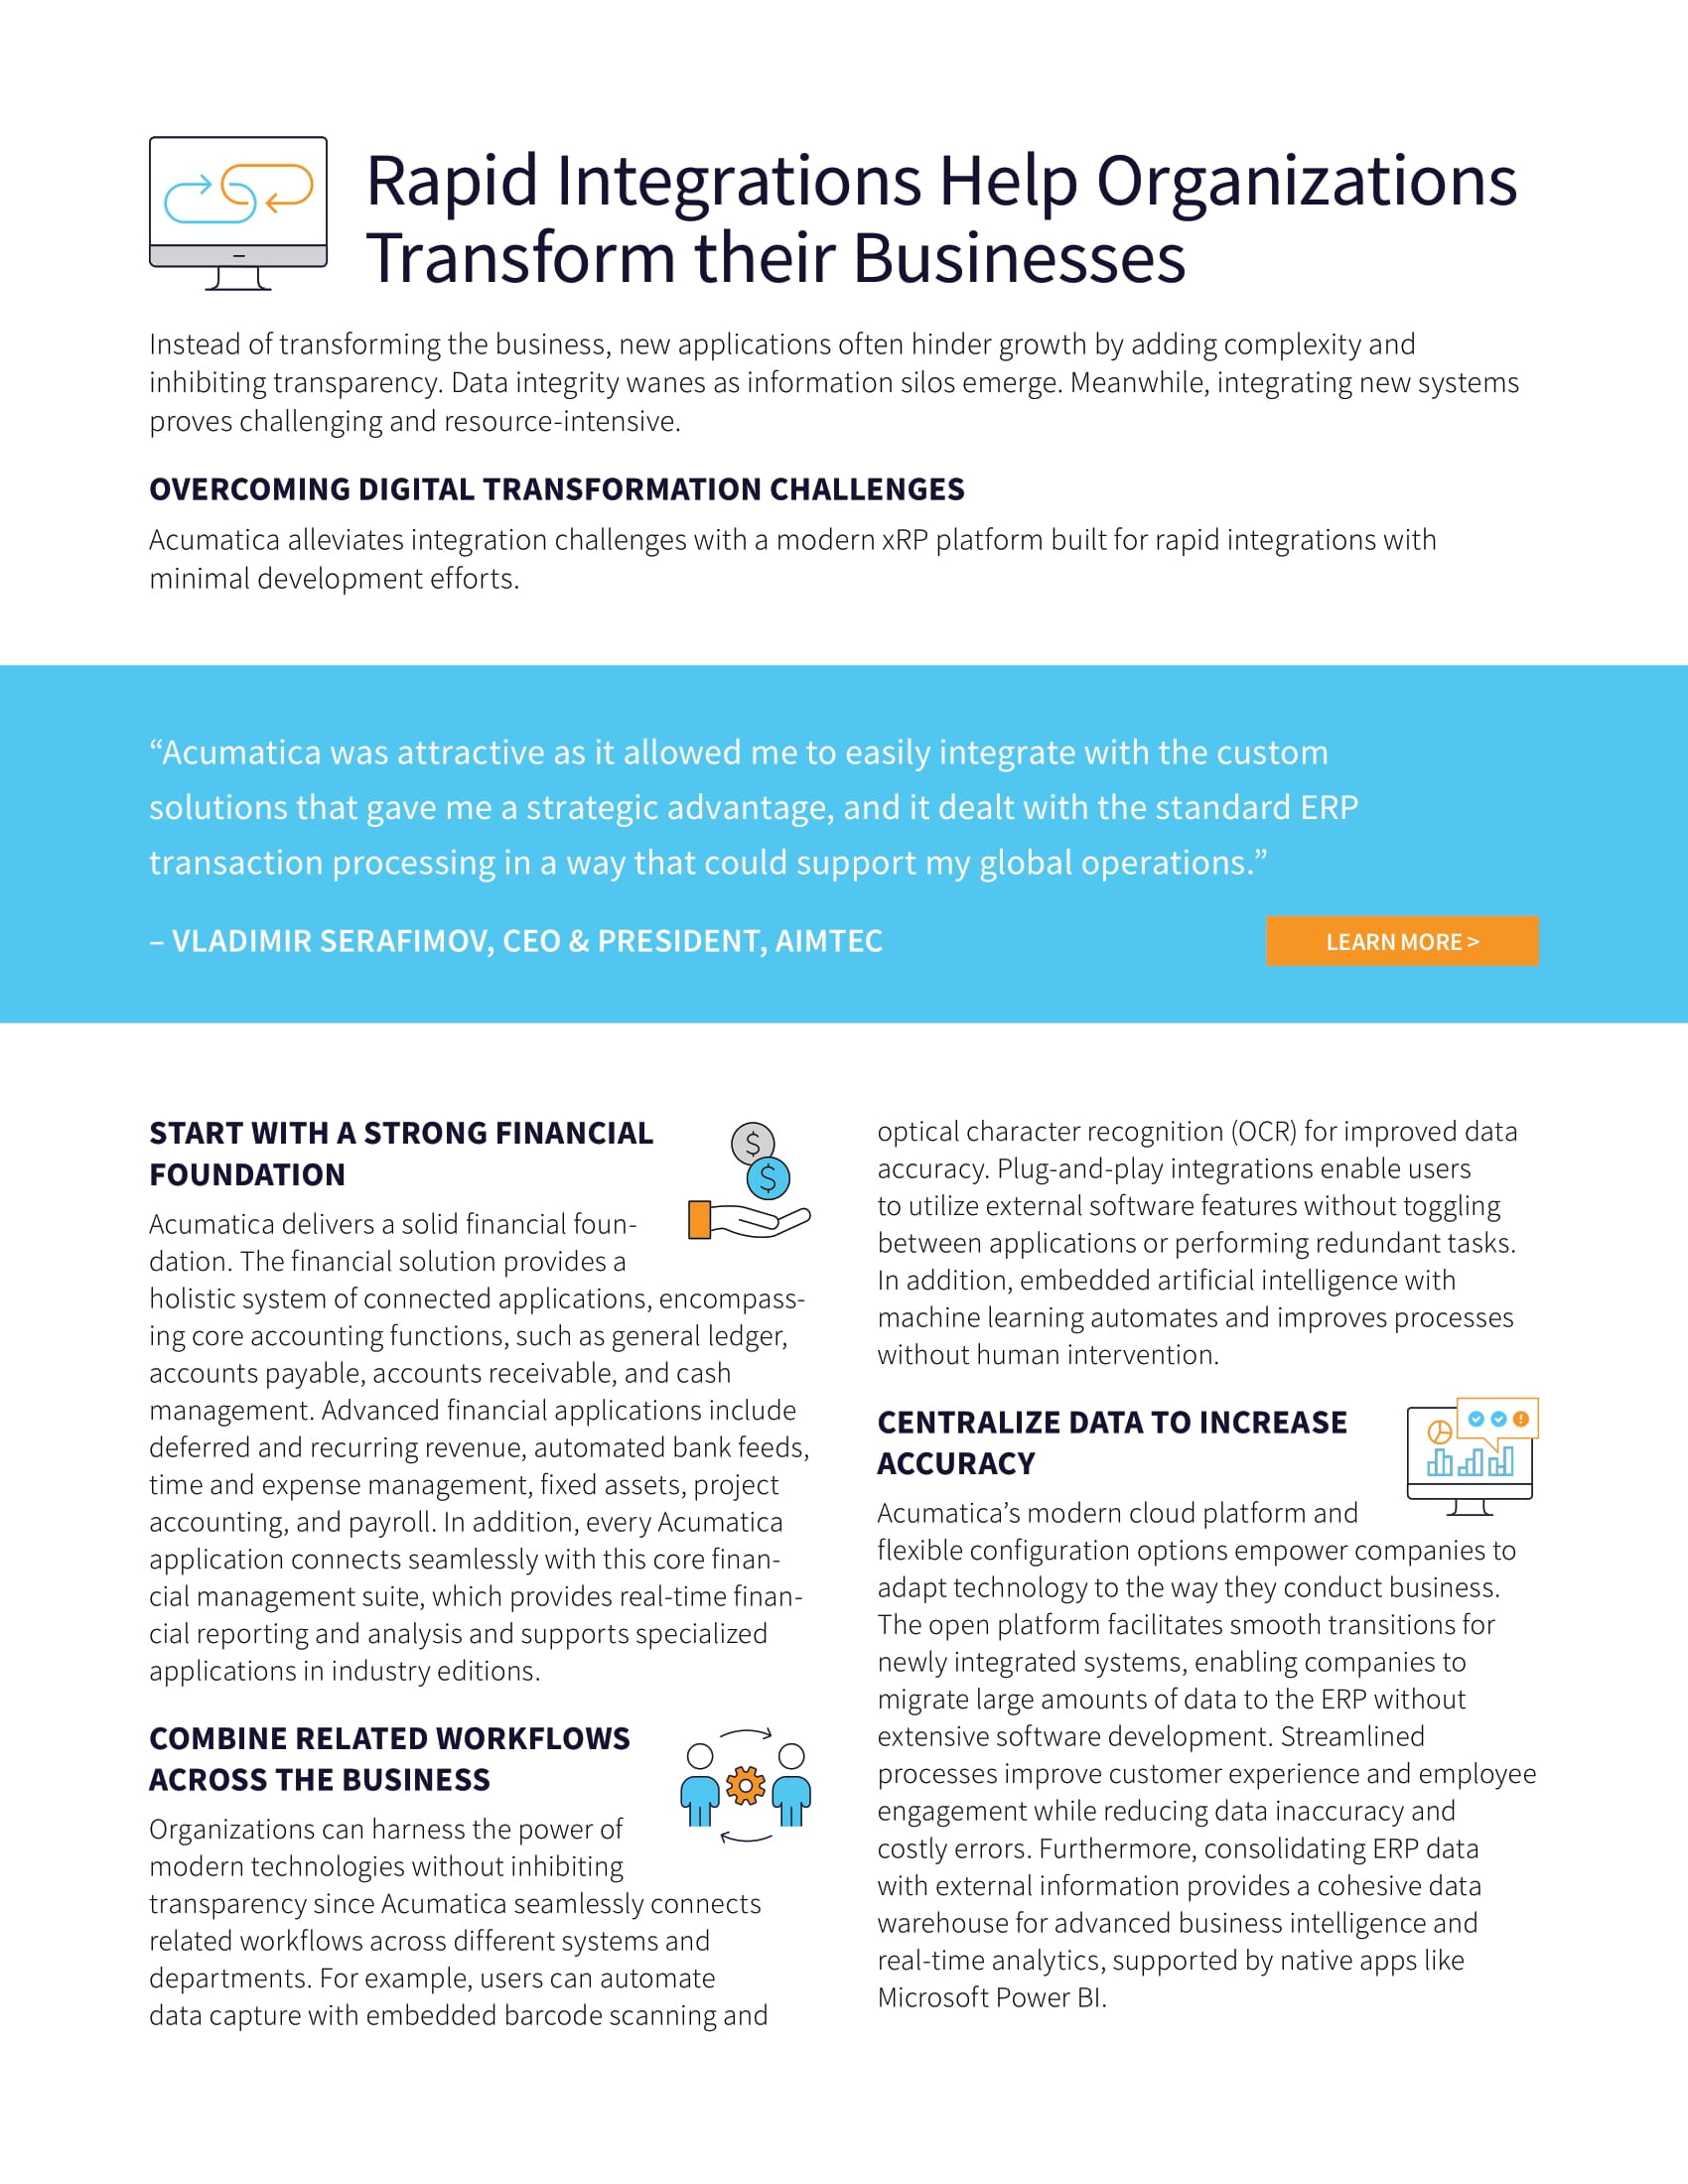 Digital Transformation: Effortlessly Integrating Multiple Systems with Acumatica, page 2